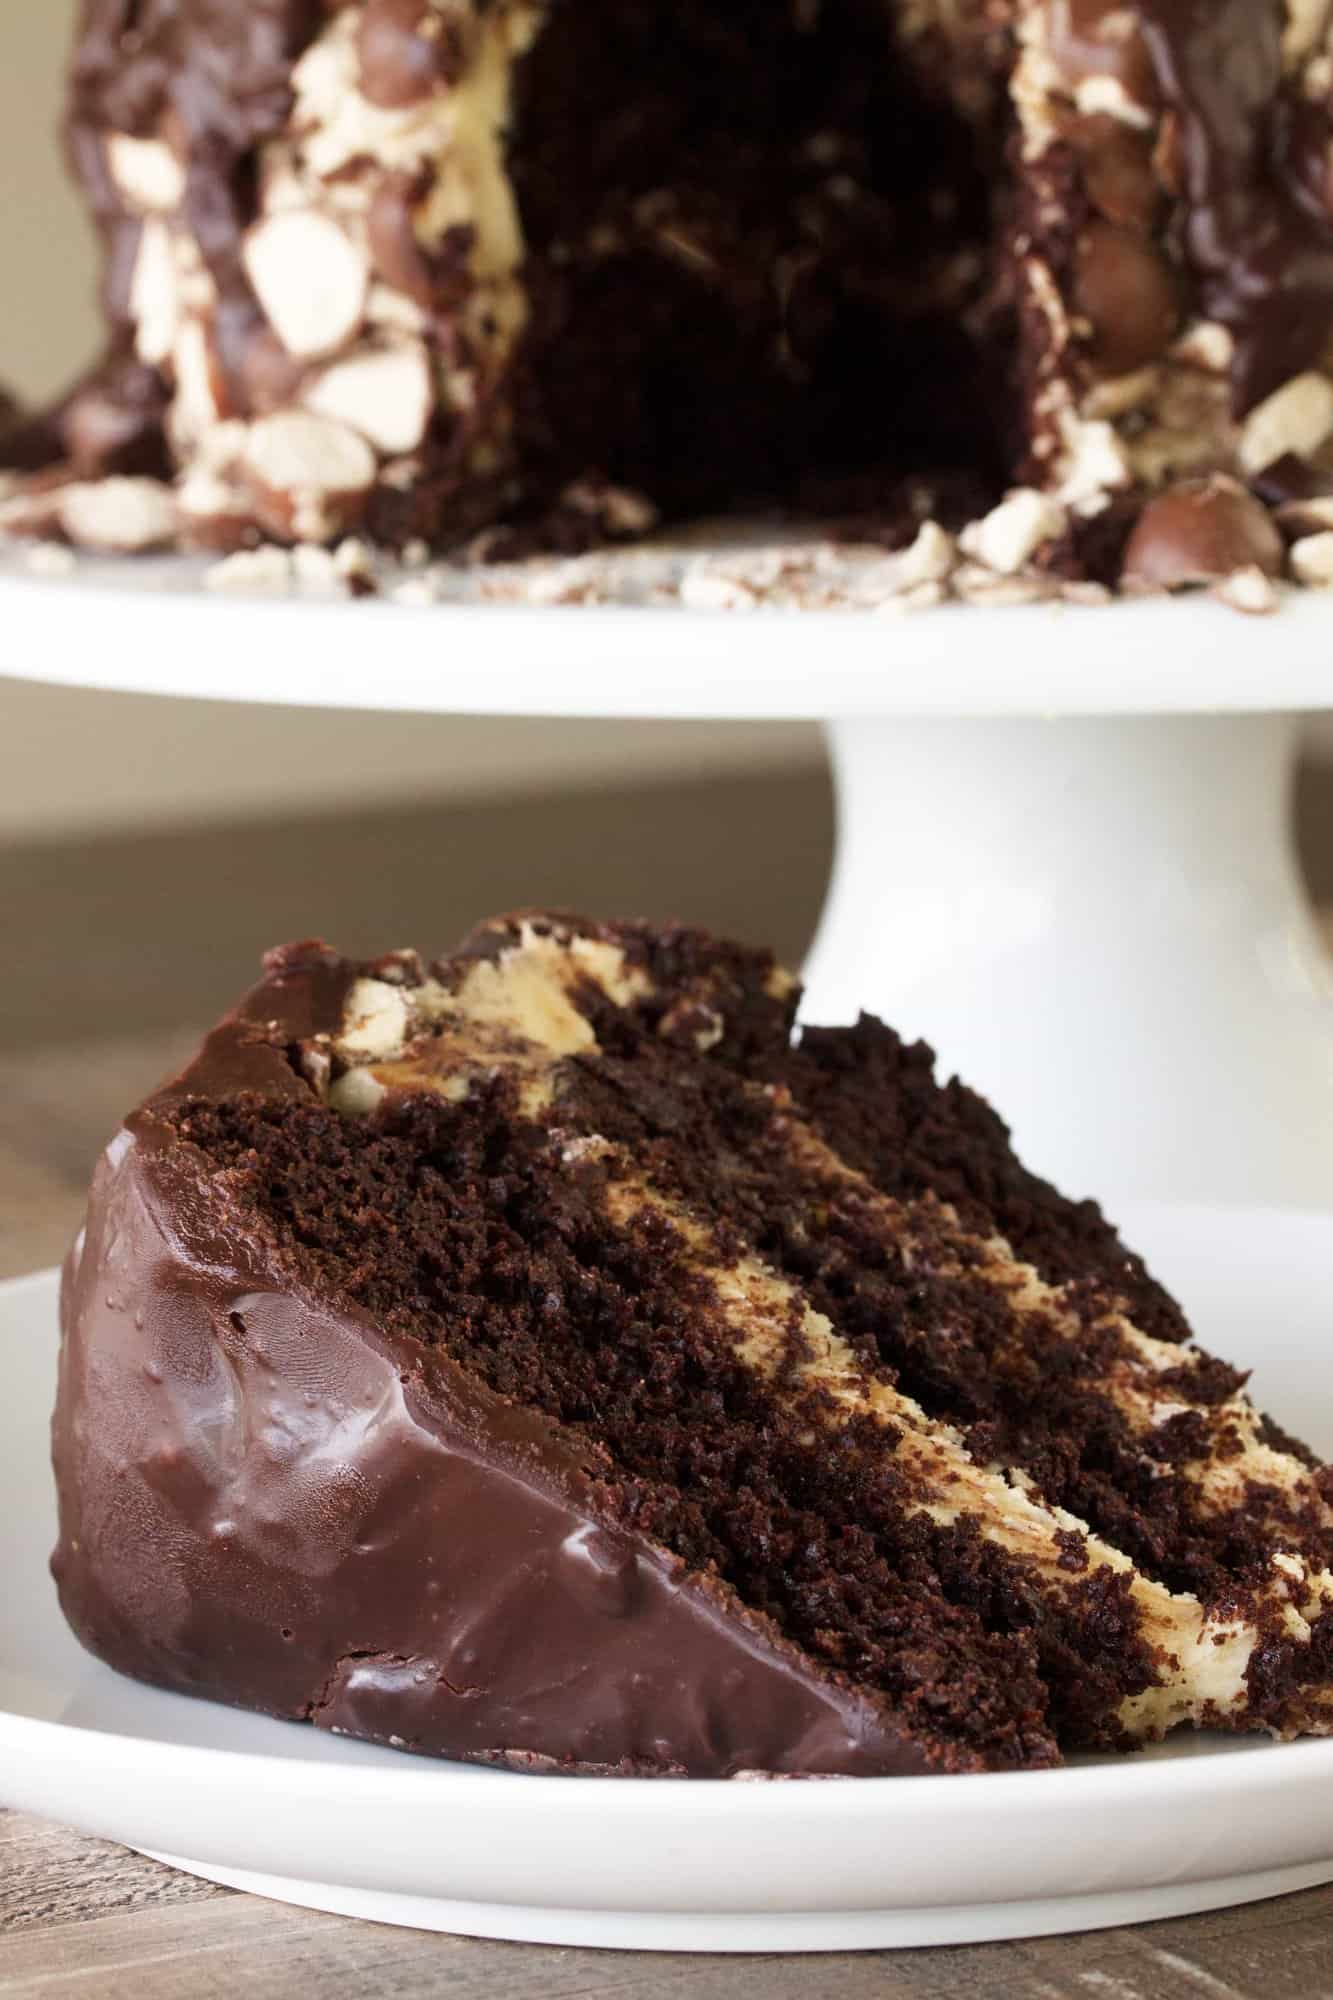 A moist and delicious triple chocolate malt cake with 3 layers of malt: malt chocolate cake, malt frosting, and a crushed malt crust. It's a malt lover's dream come true!